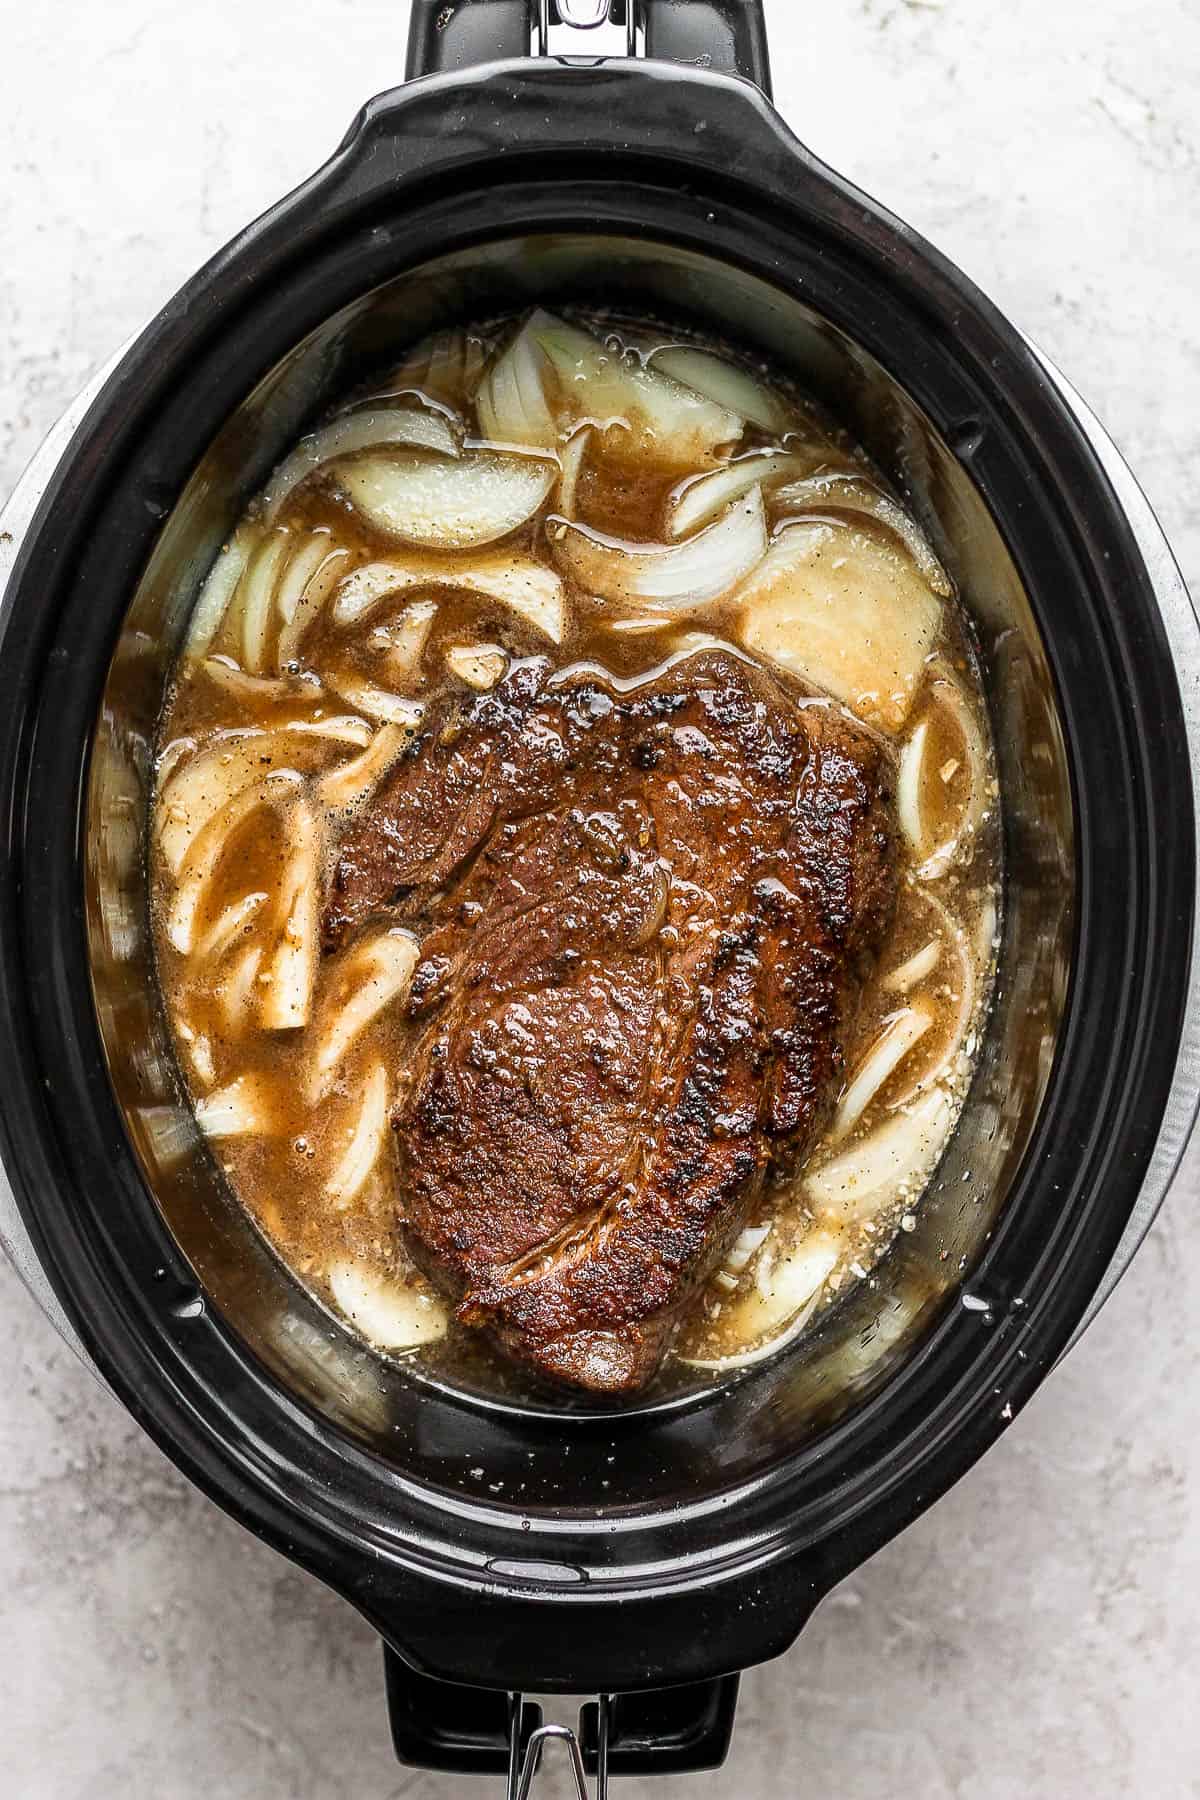 The seared chuck roast in the crockpot with the beef broth mixture.